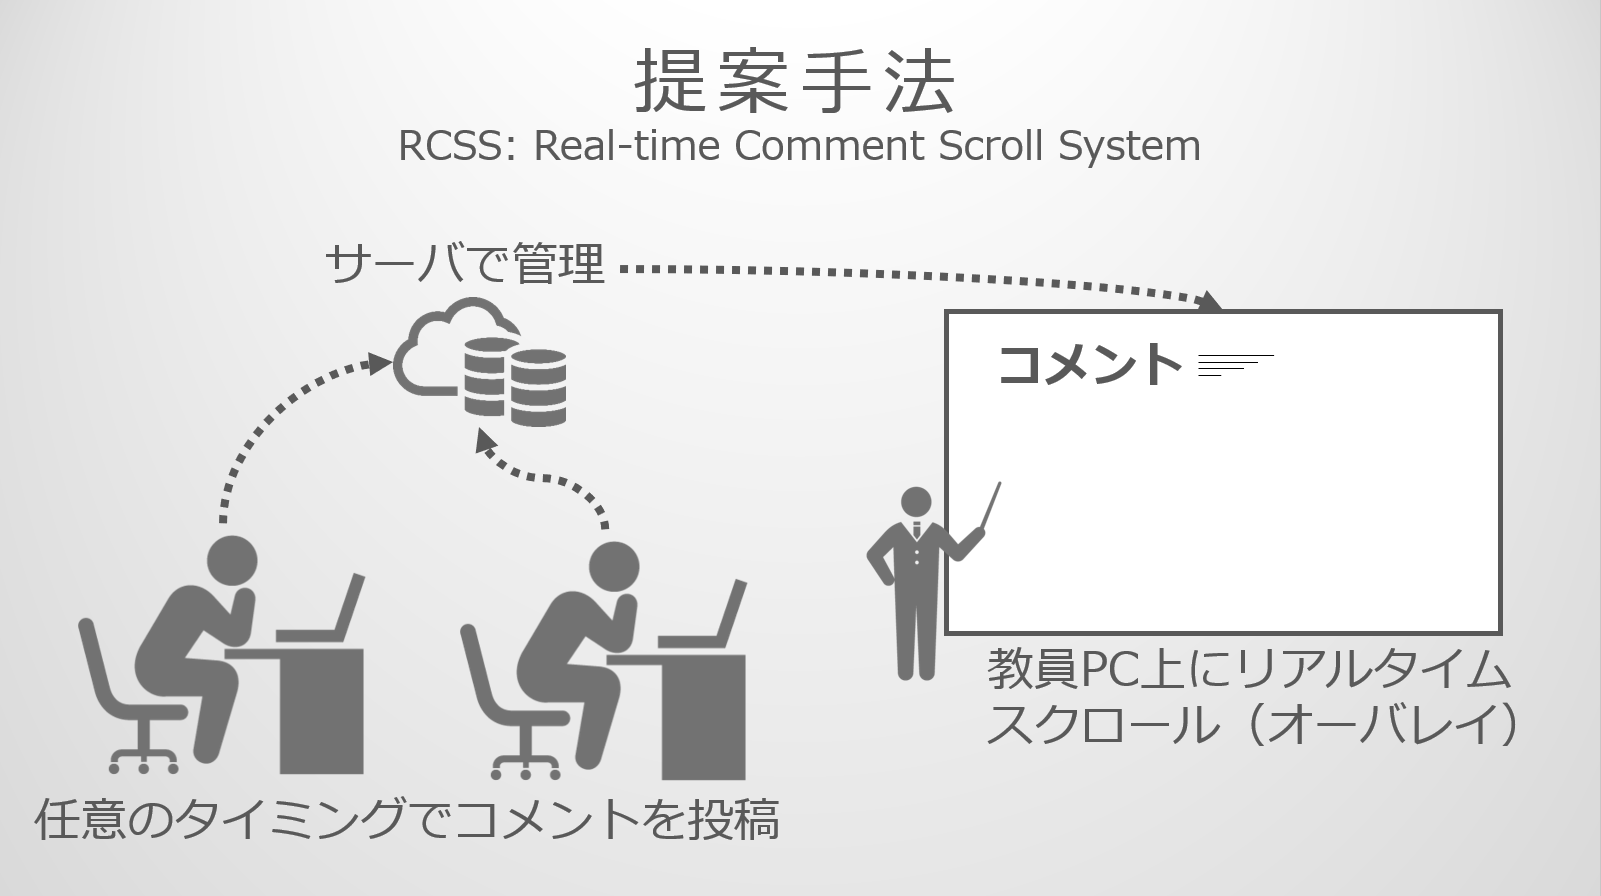 Real-time Comment Scroll System